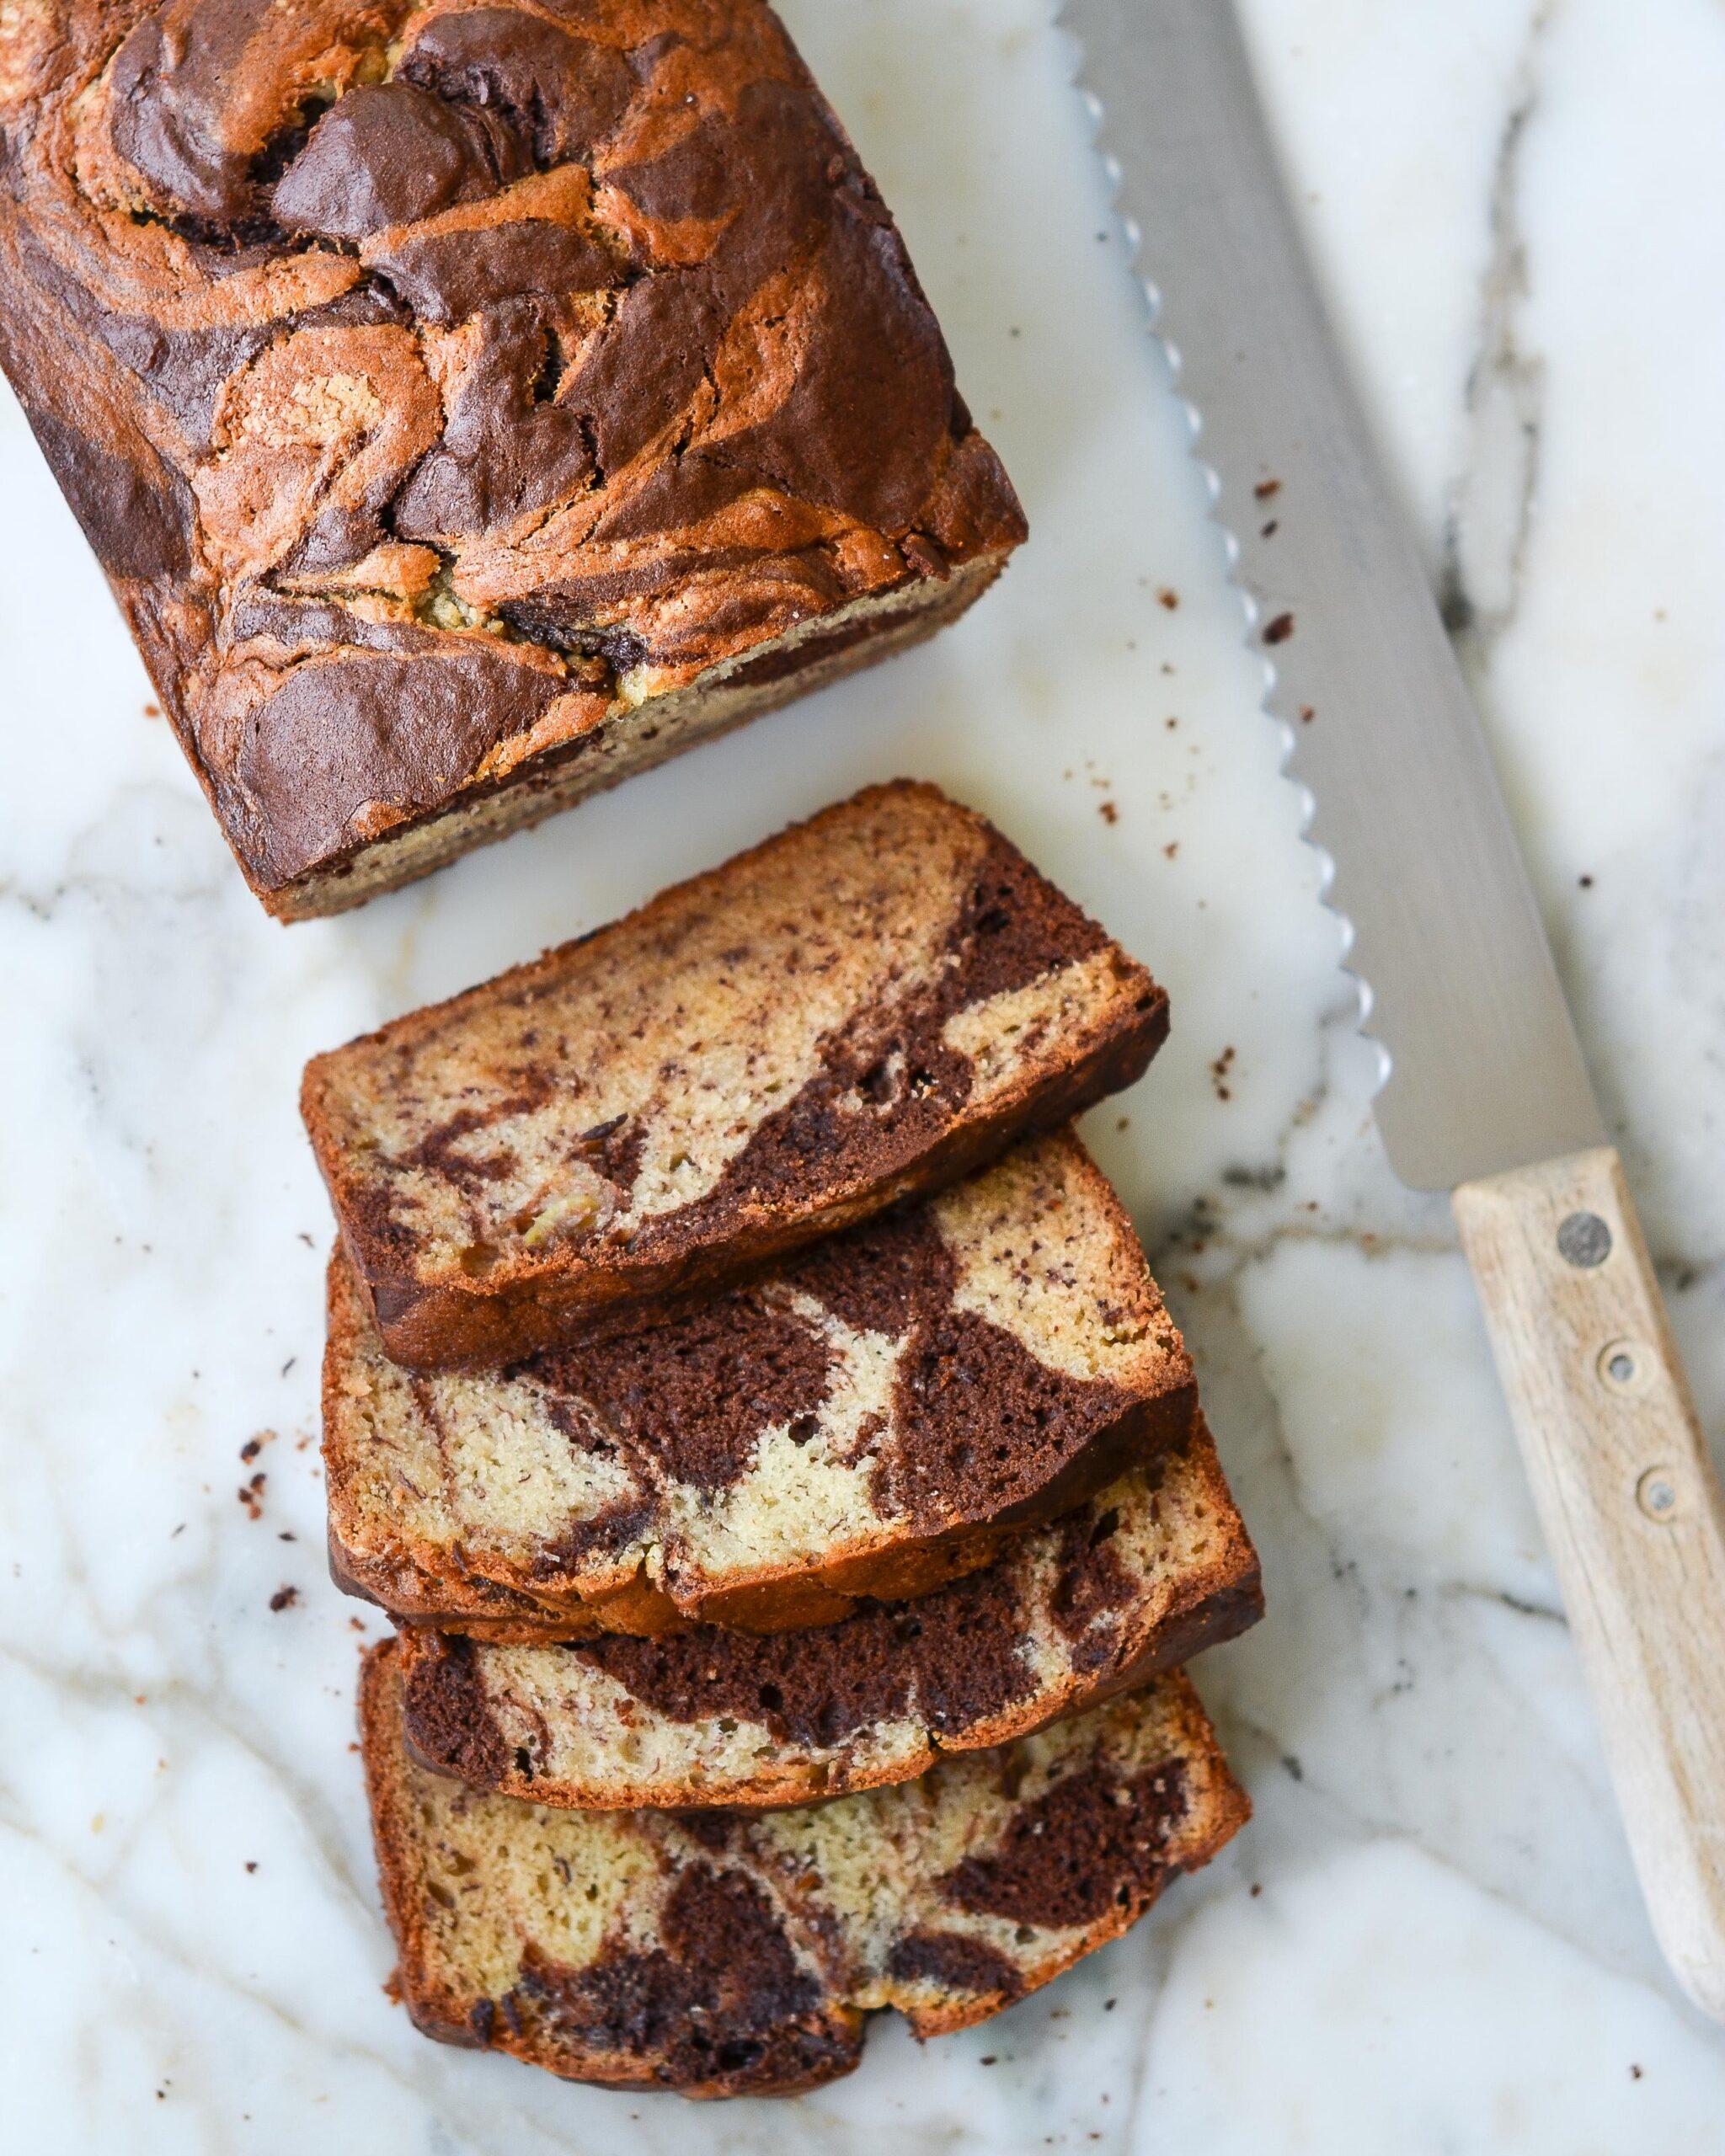  Get ready to fall in love with this mouth-watering Banana Marble Coffee Cake!